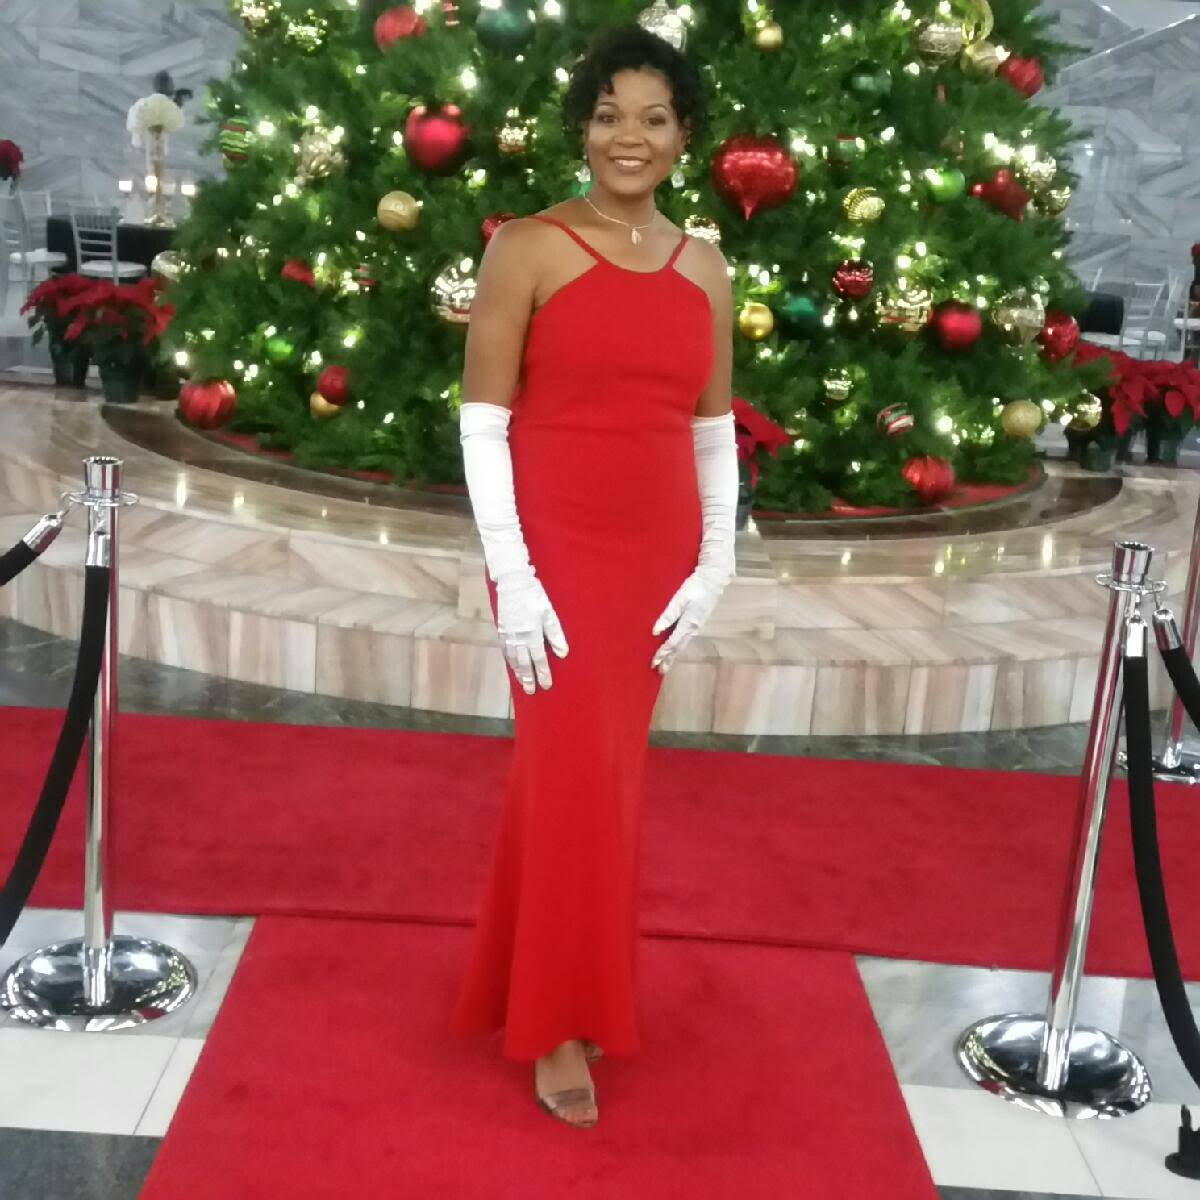 black woman in a red dress